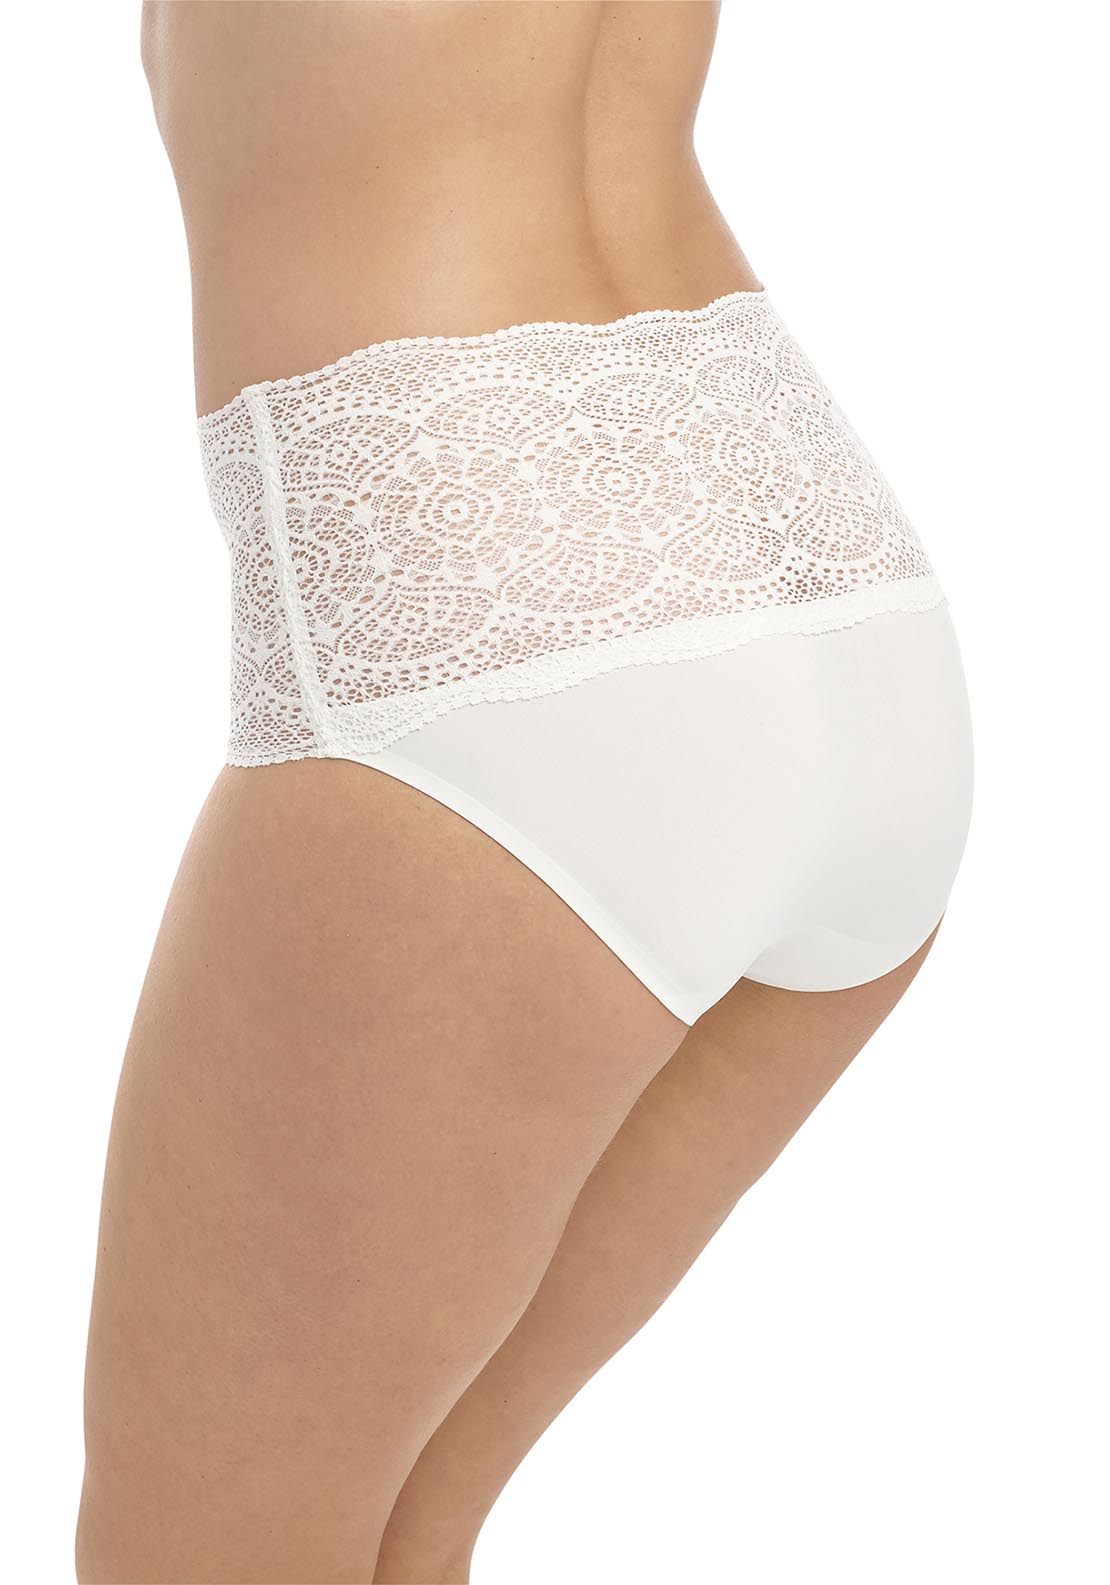 Fantasie Lace Ease Invisible Stretch Full Briefs - Ivory 3 Shaws Department Stores